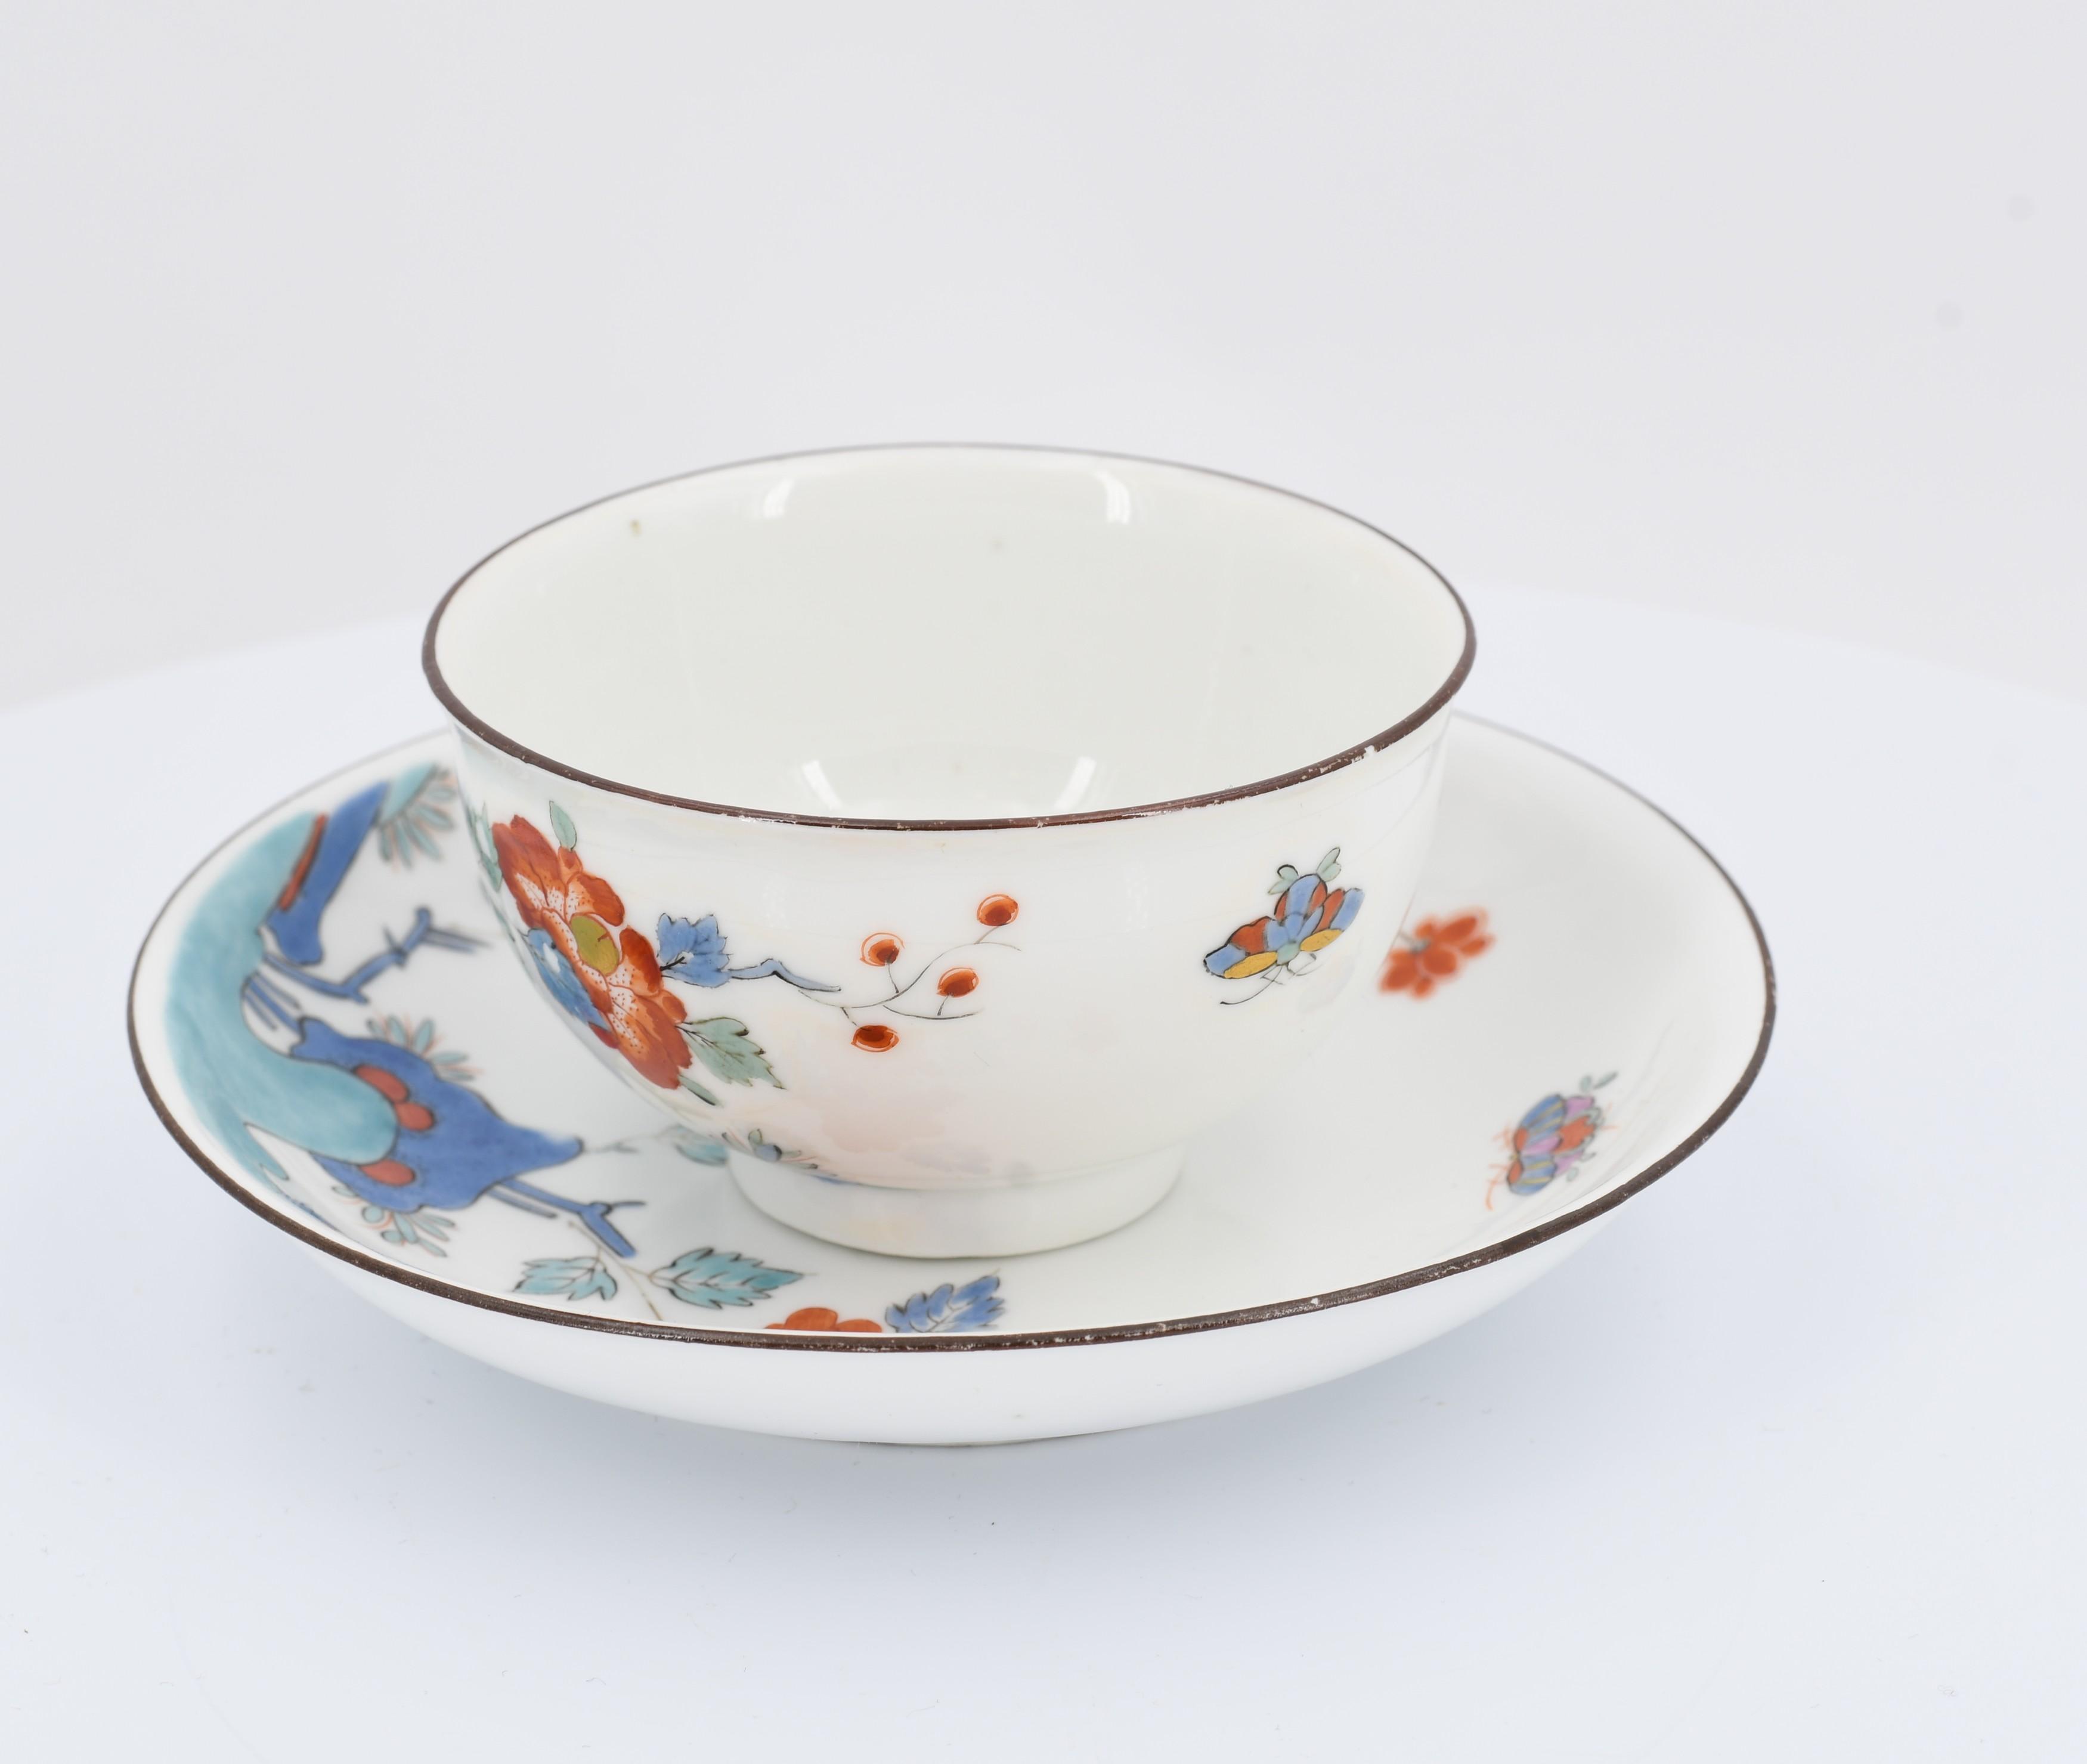 Tea bowl and saucer with Kakiemon dékor - Image 3 of 7